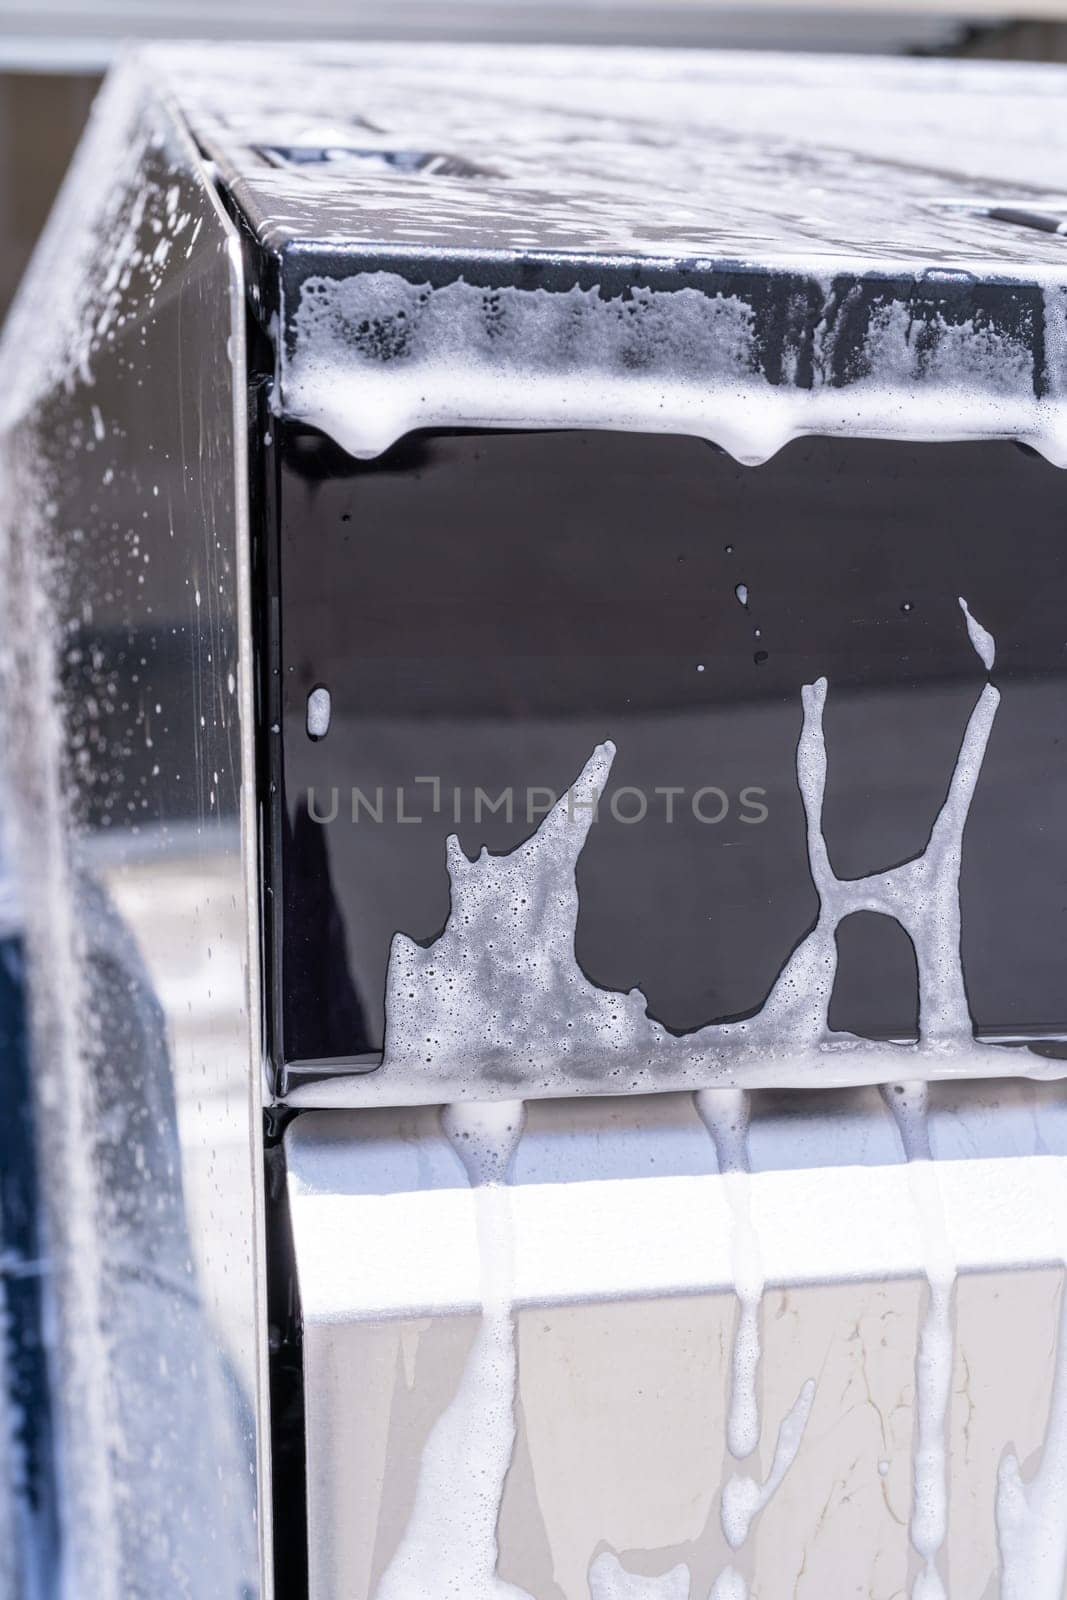 Soap Suds Dripping from the Edge of Tesla Cybertruck Window by arinahabich